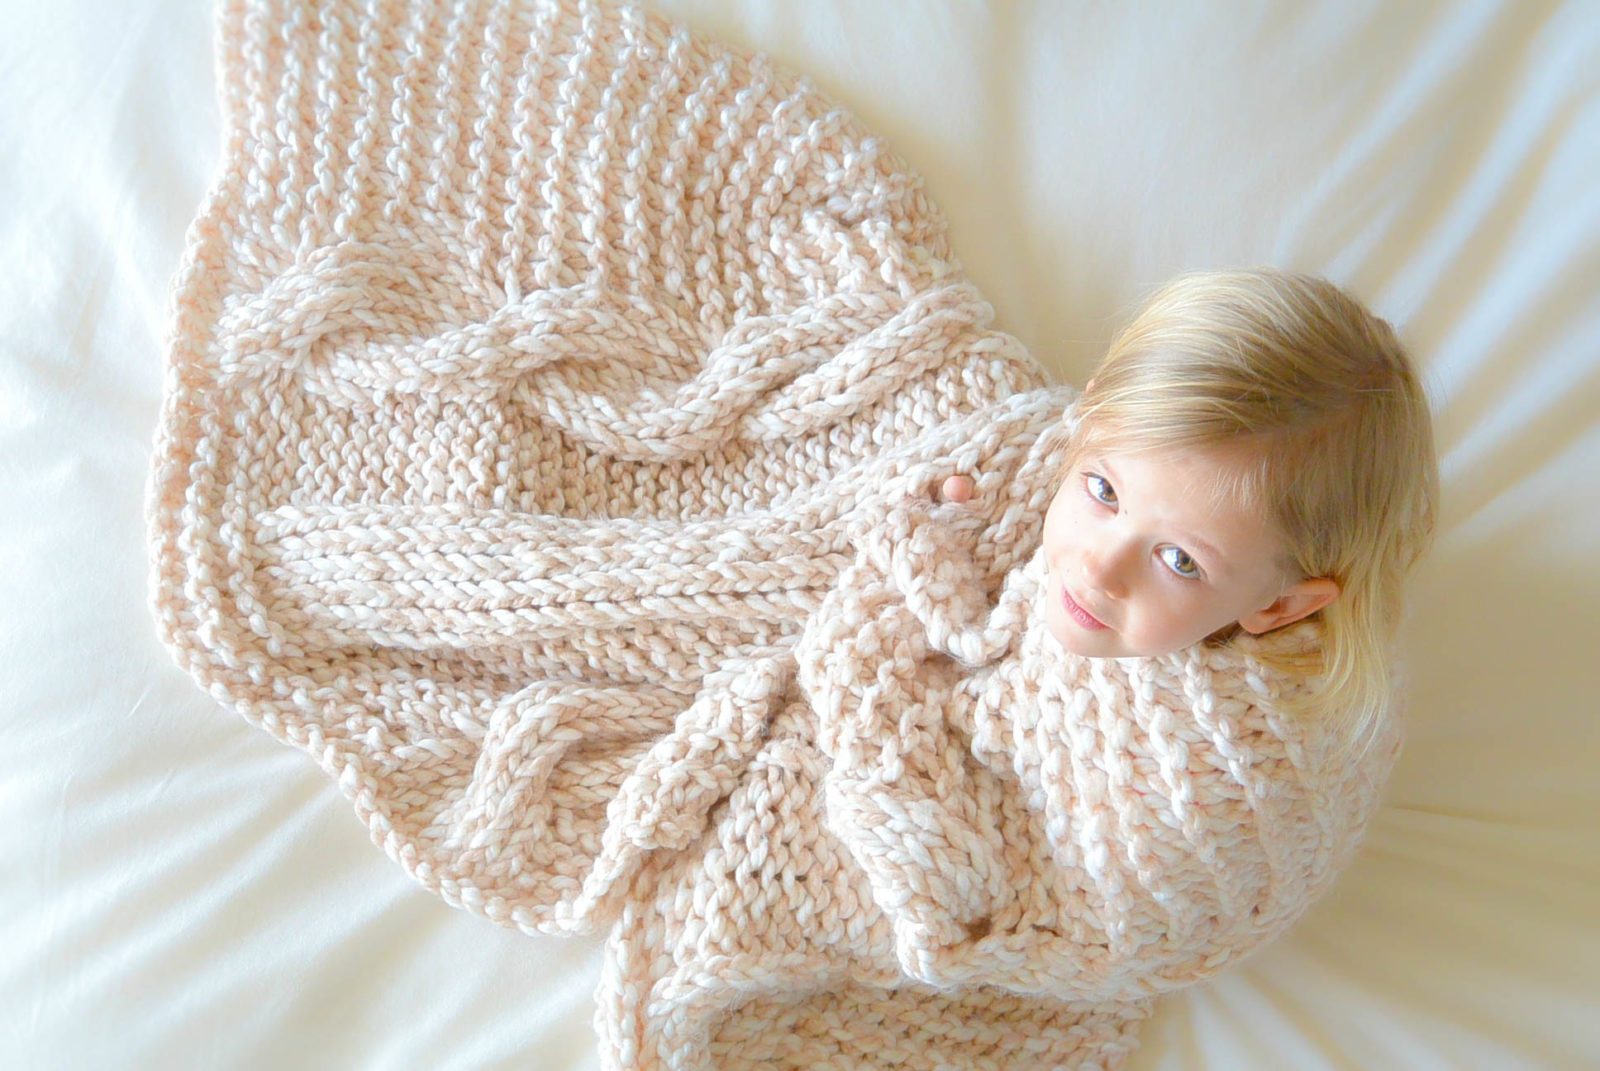 Easy Cable Knit Sweater Free Pattern – Mama In A Stitch